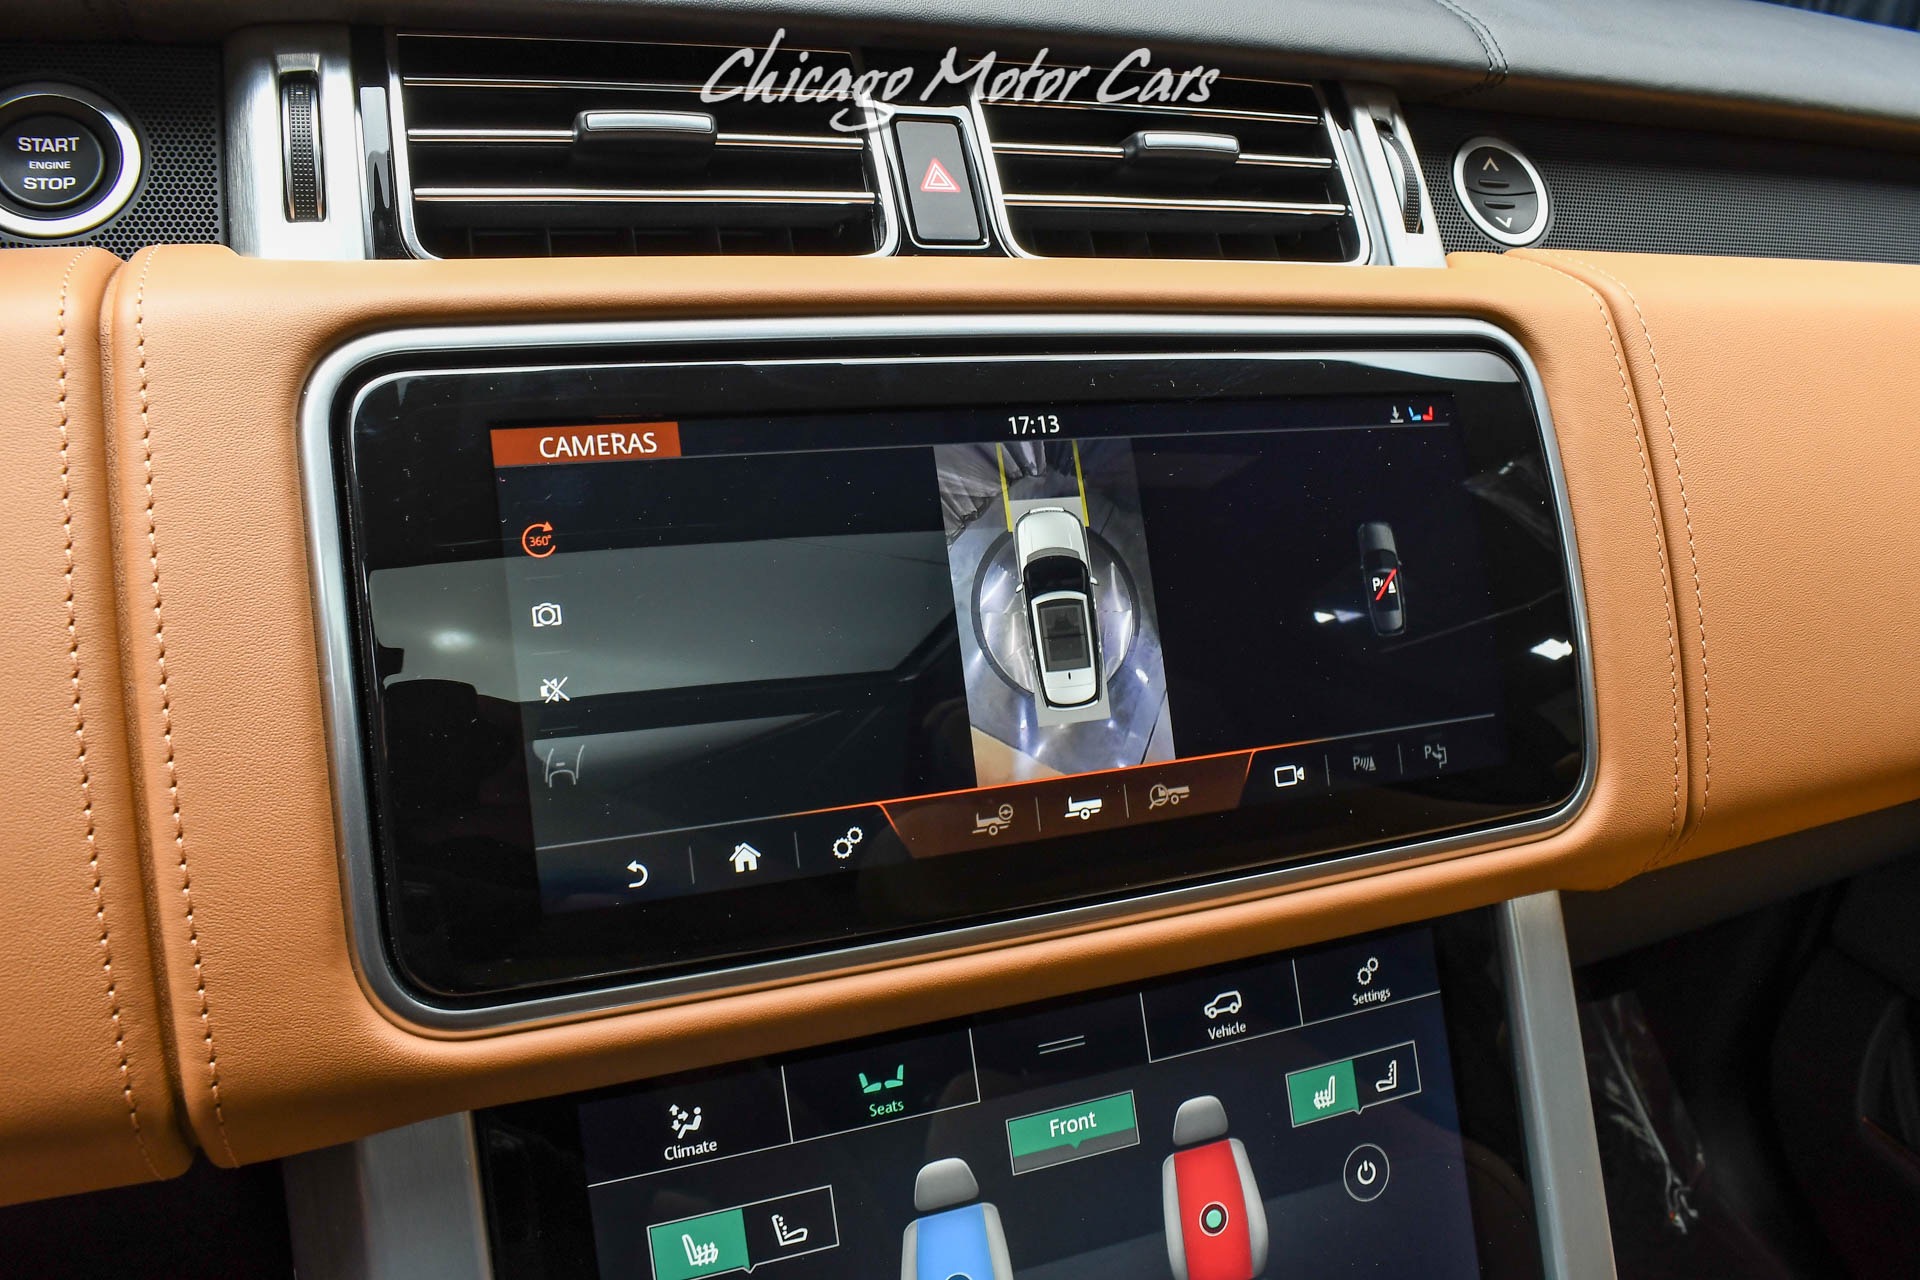 Used-2020-Land-Rover-Range-Rover-Autobiography-LWB-Rear-Entertainment-Executive-Rear-Seating